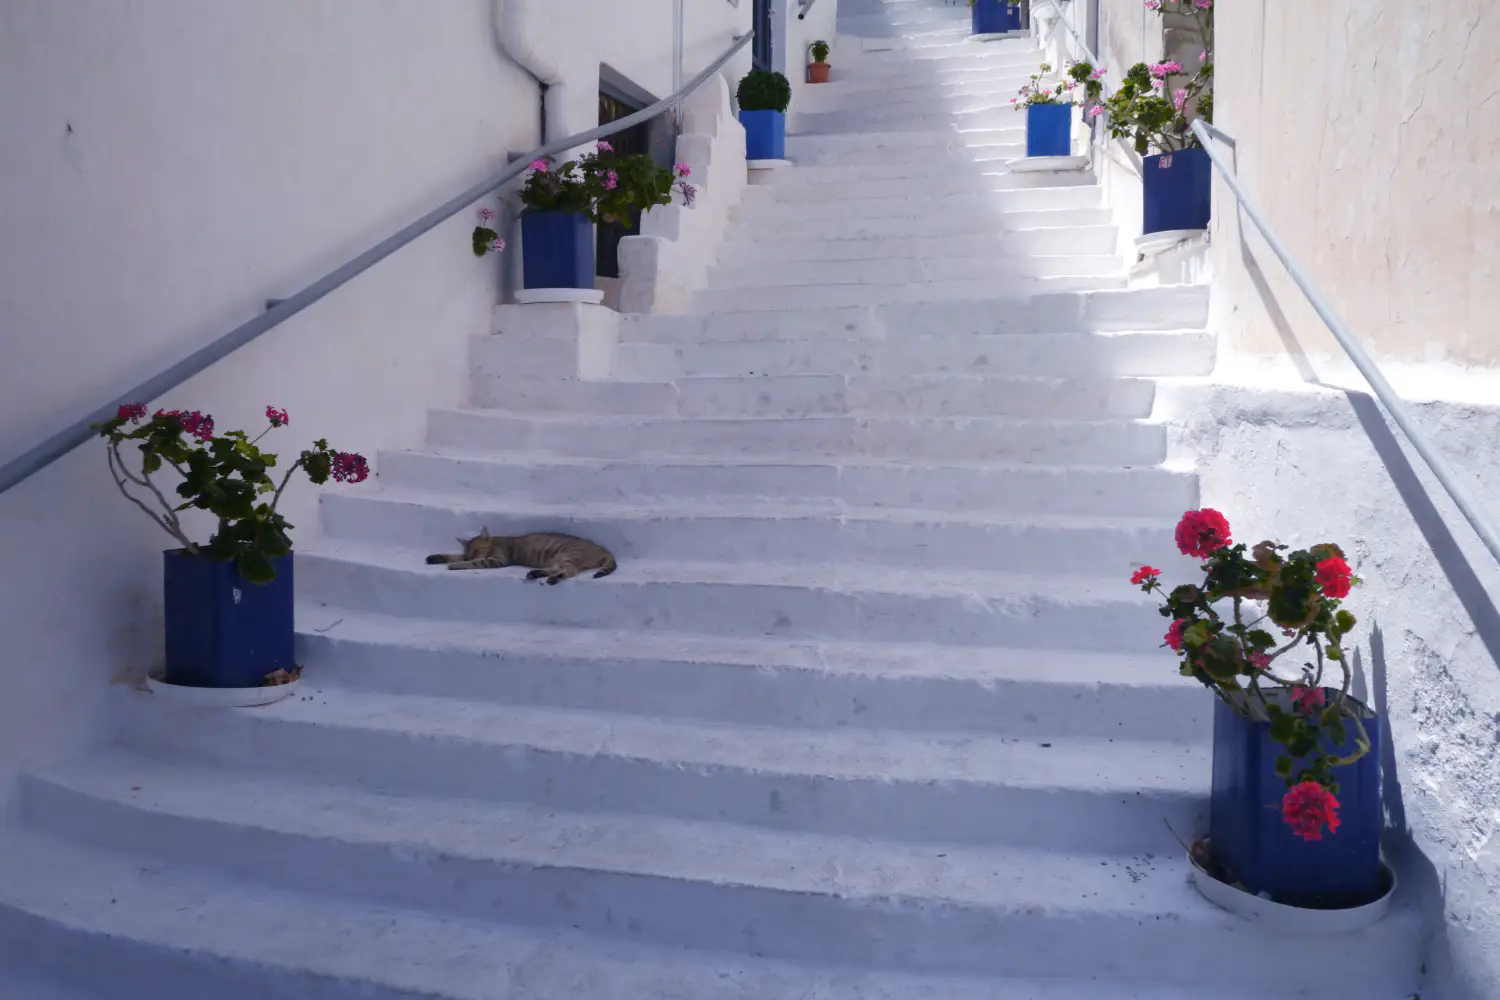 Ferry to Ikaria - A typical street in Greek village, on Icaria Island. Cat resting on the stairs.